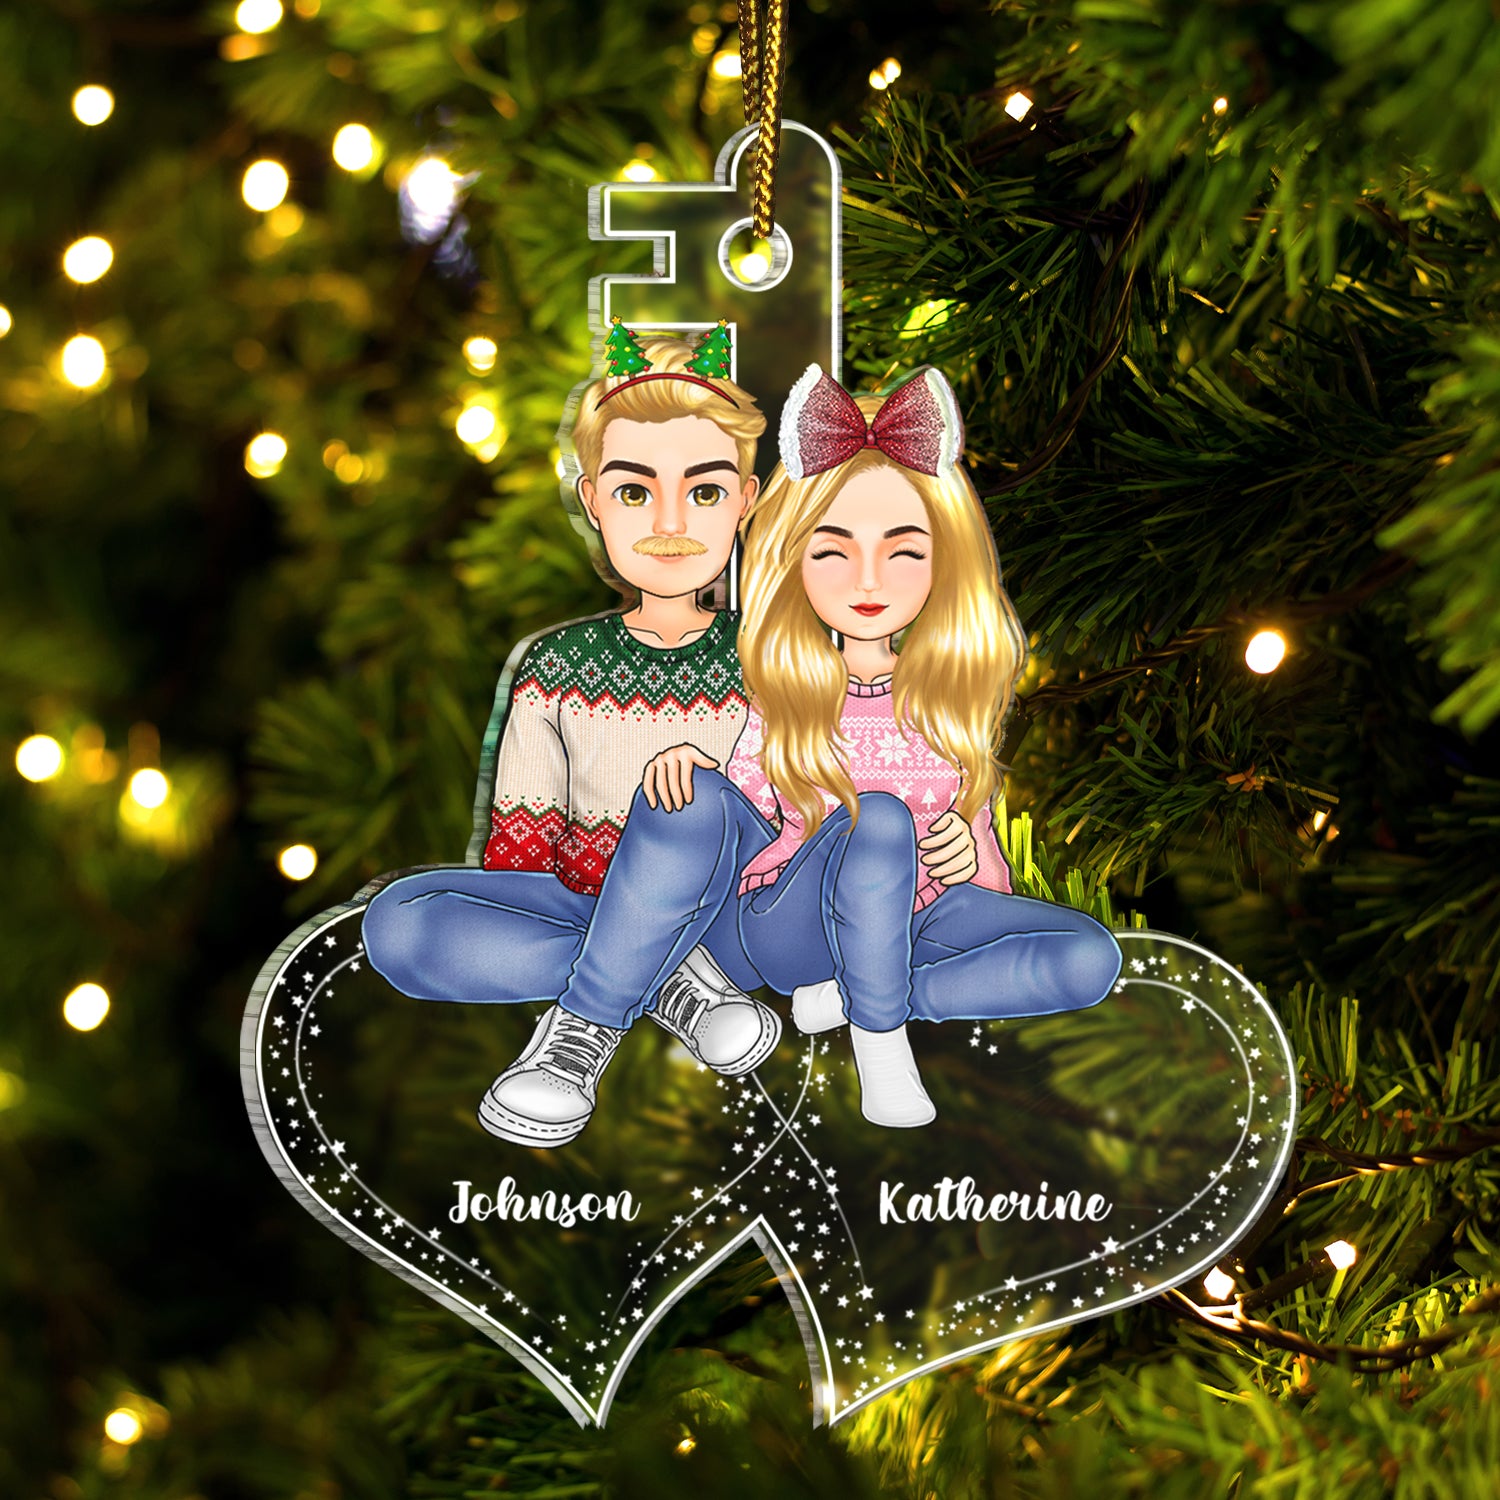 Couples Love Key - Christmas Gift For Couples - Personalized Cutout Acrylic Ornament